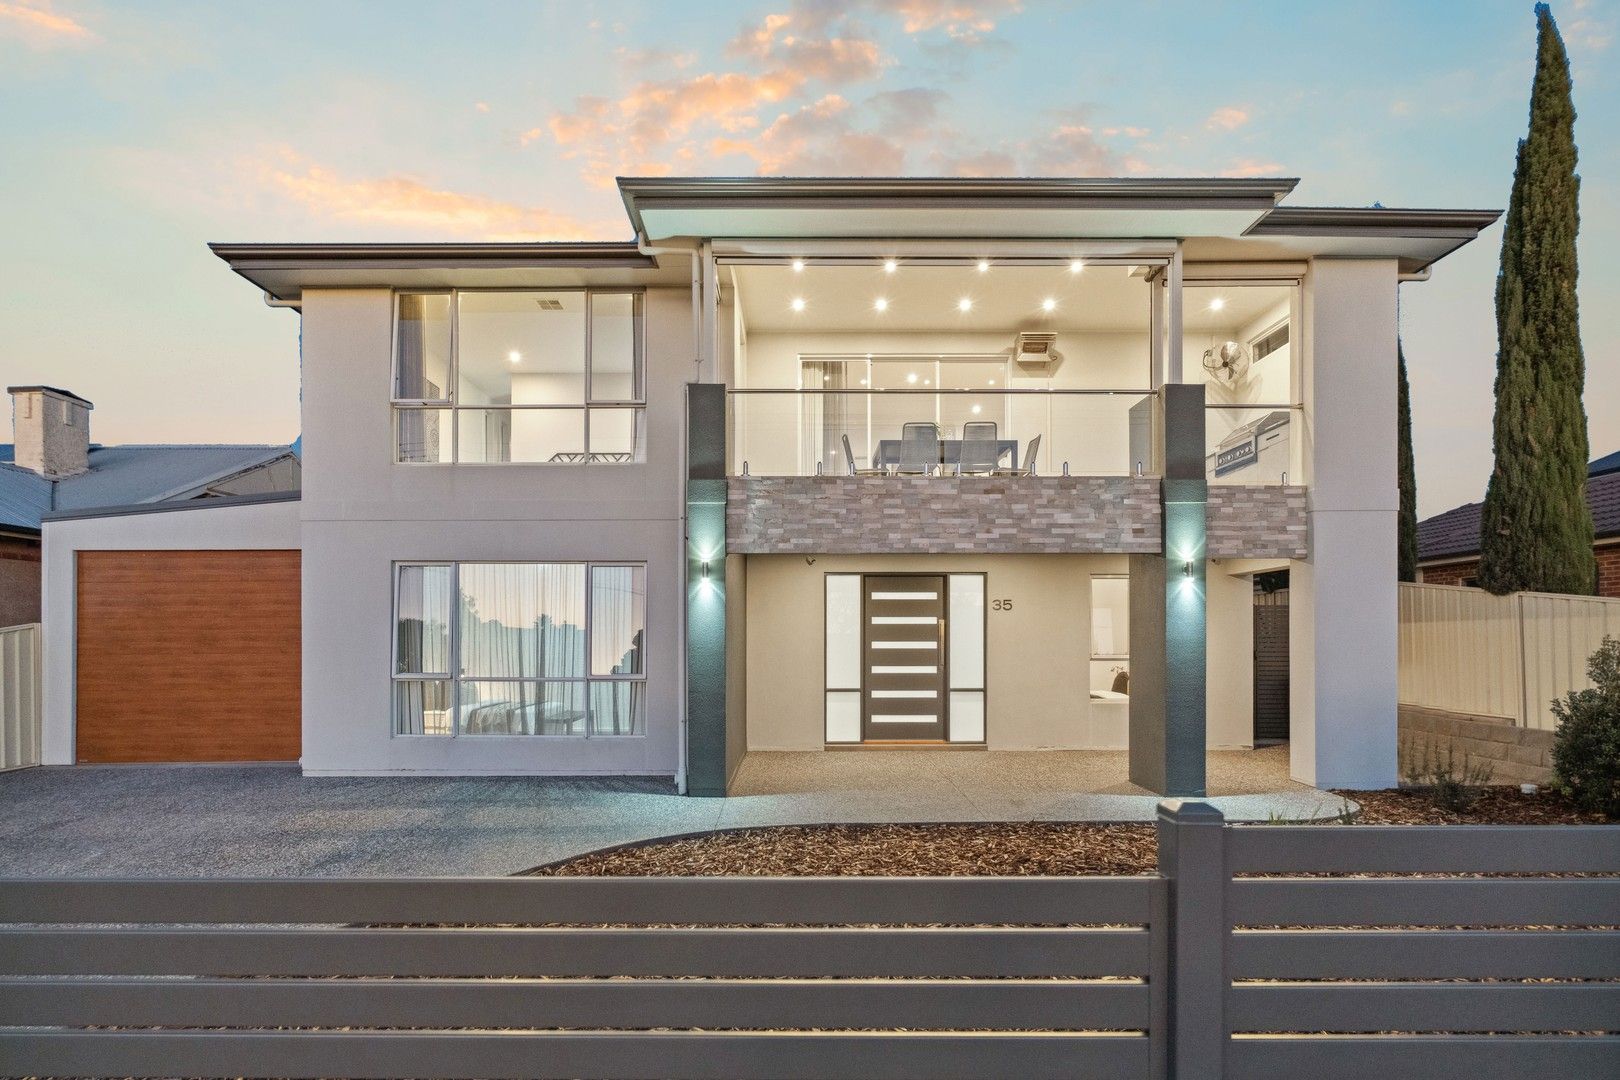 5 bedrooms House in 35 High Street SOUTH BRIGHTON SA, 5048